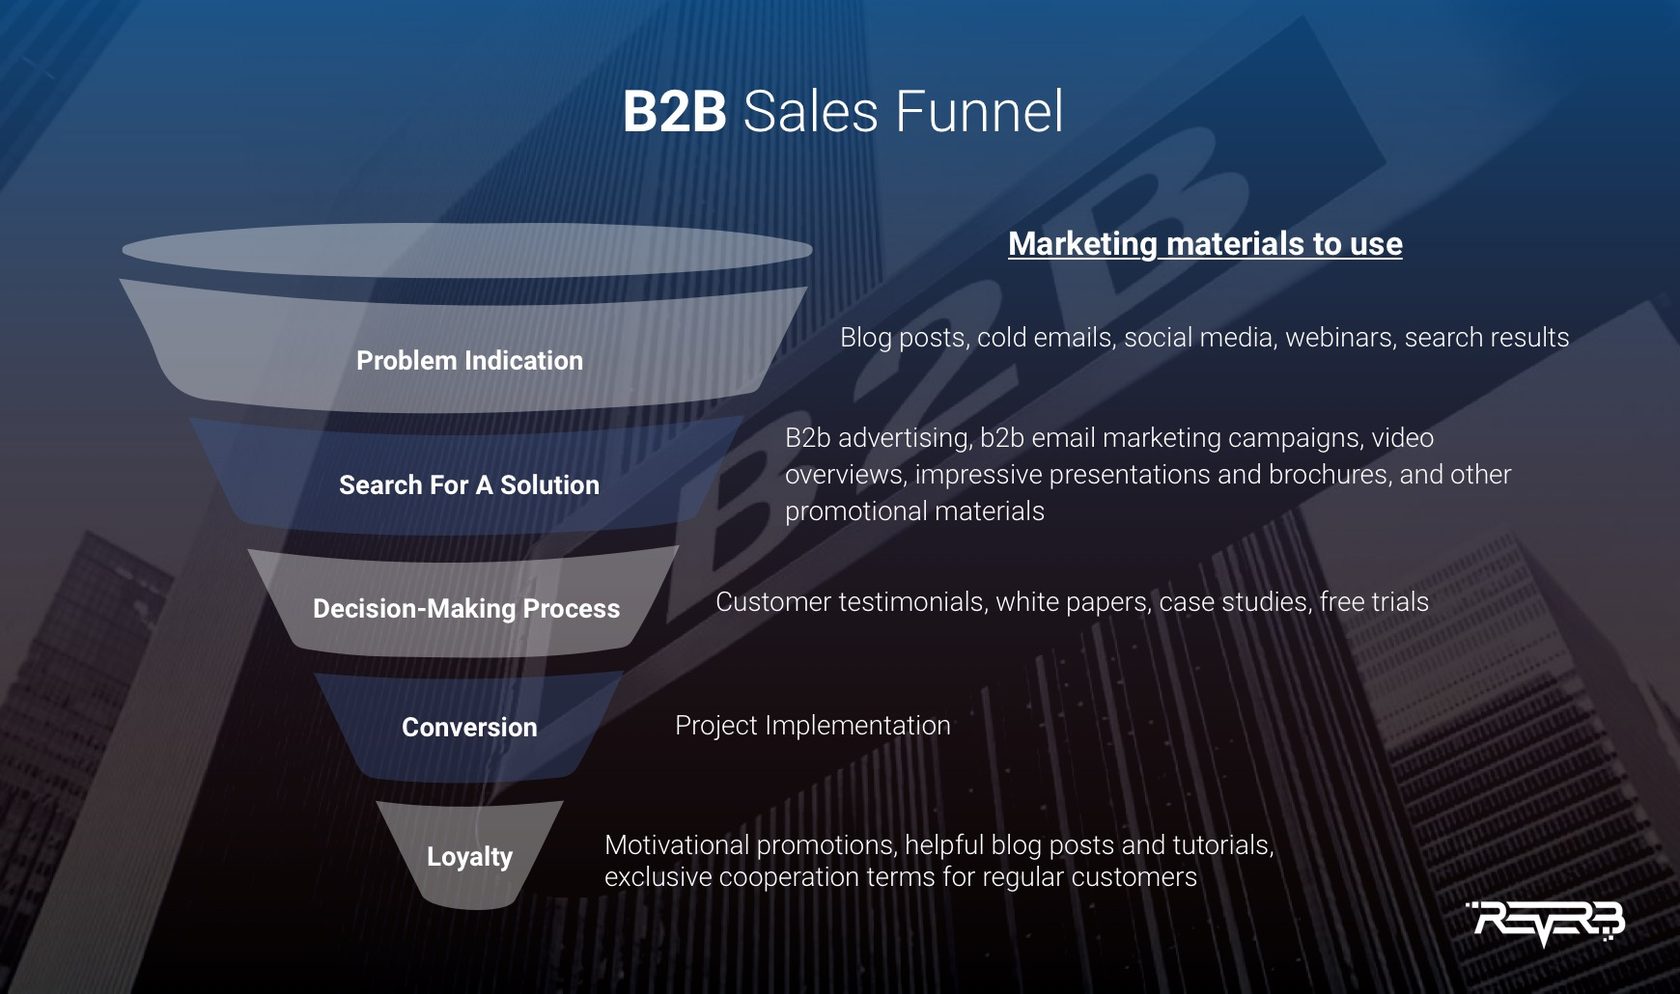 8 Best B2B Marketing Strategies For 2020 [With Examples]